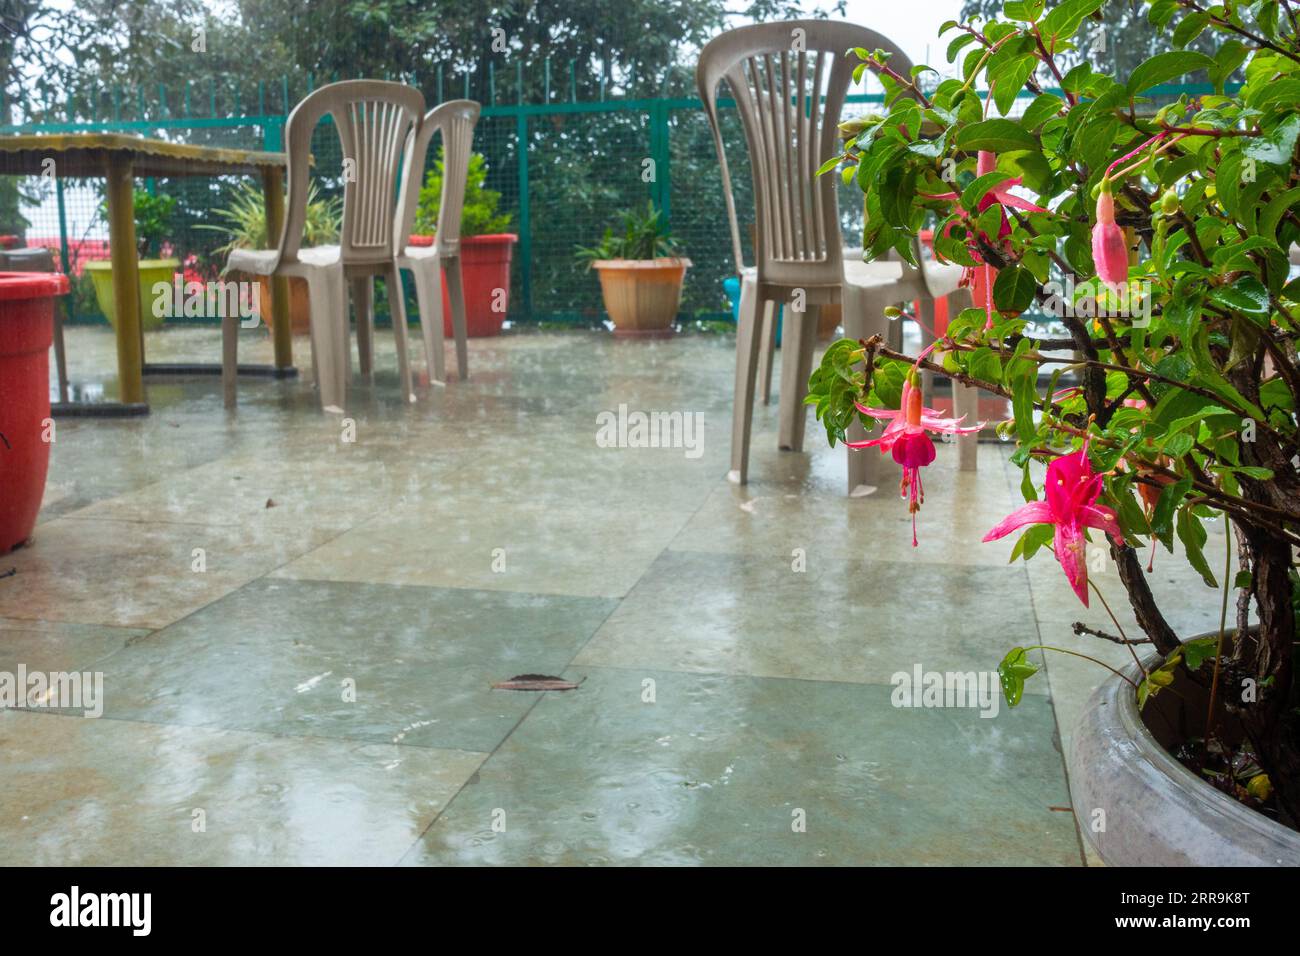 An image of an outdoor garden balcony with empty chairs and a table during a rainy monsoon season in Himachal Pradesh, India Stock Photo